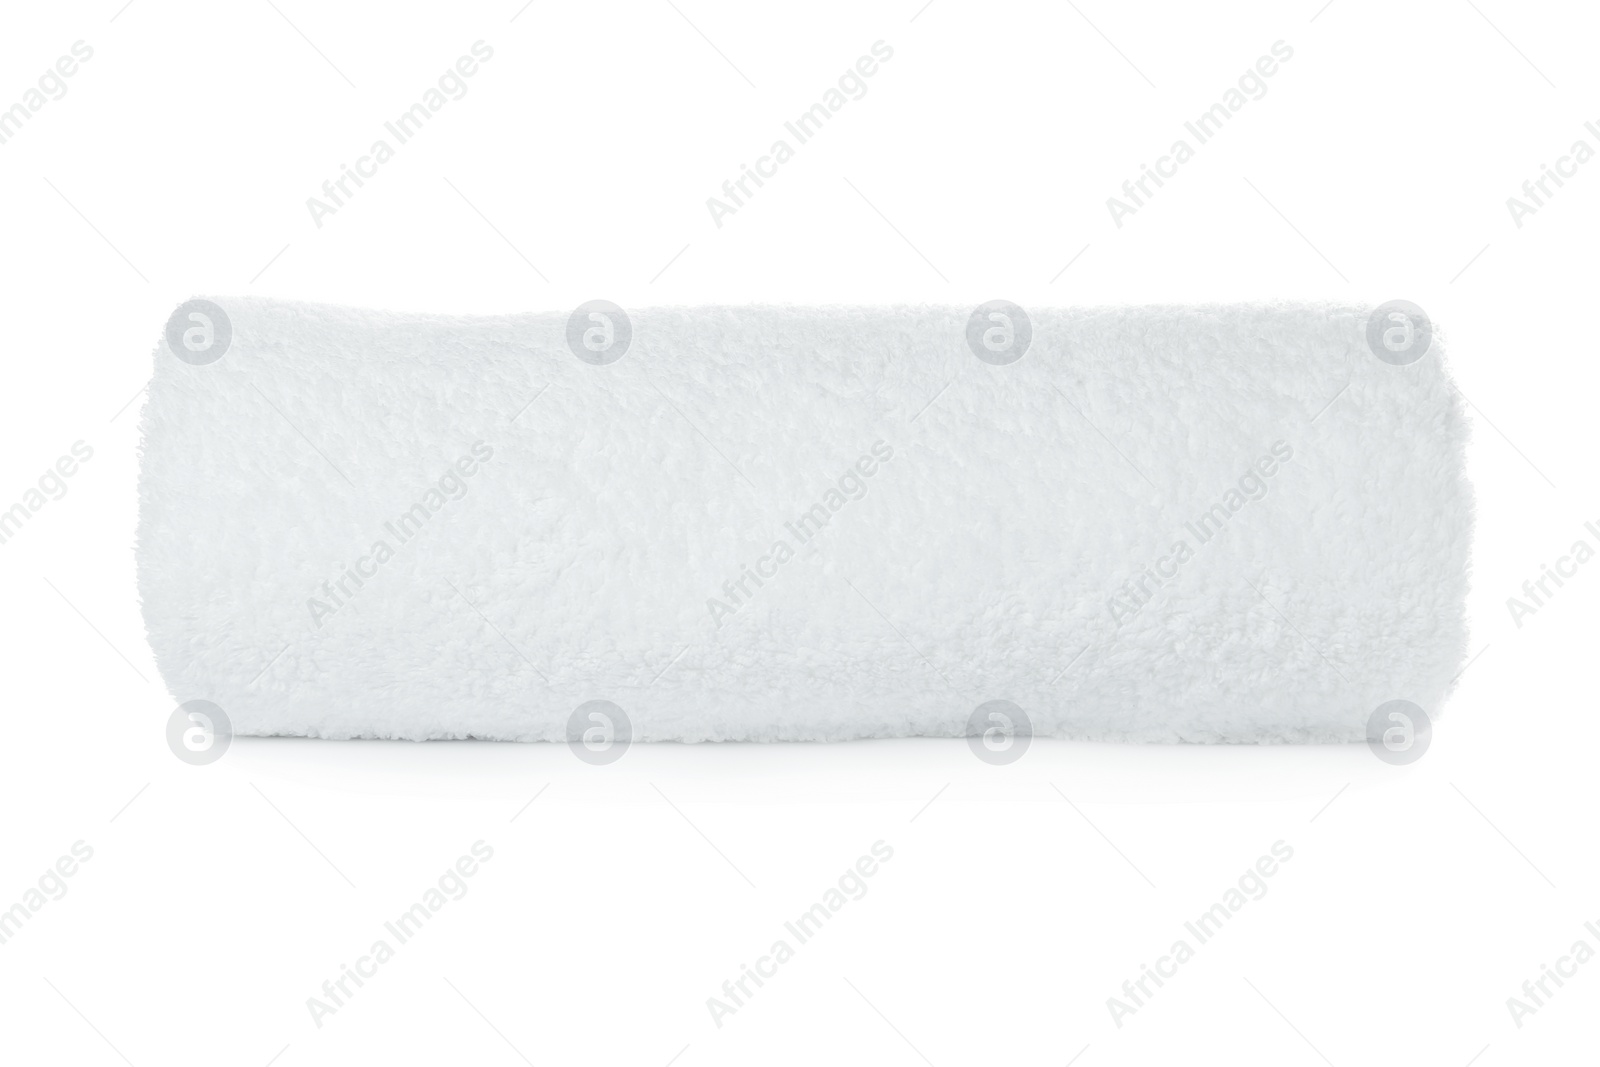 Photo of Rolled soft terry towel on white background